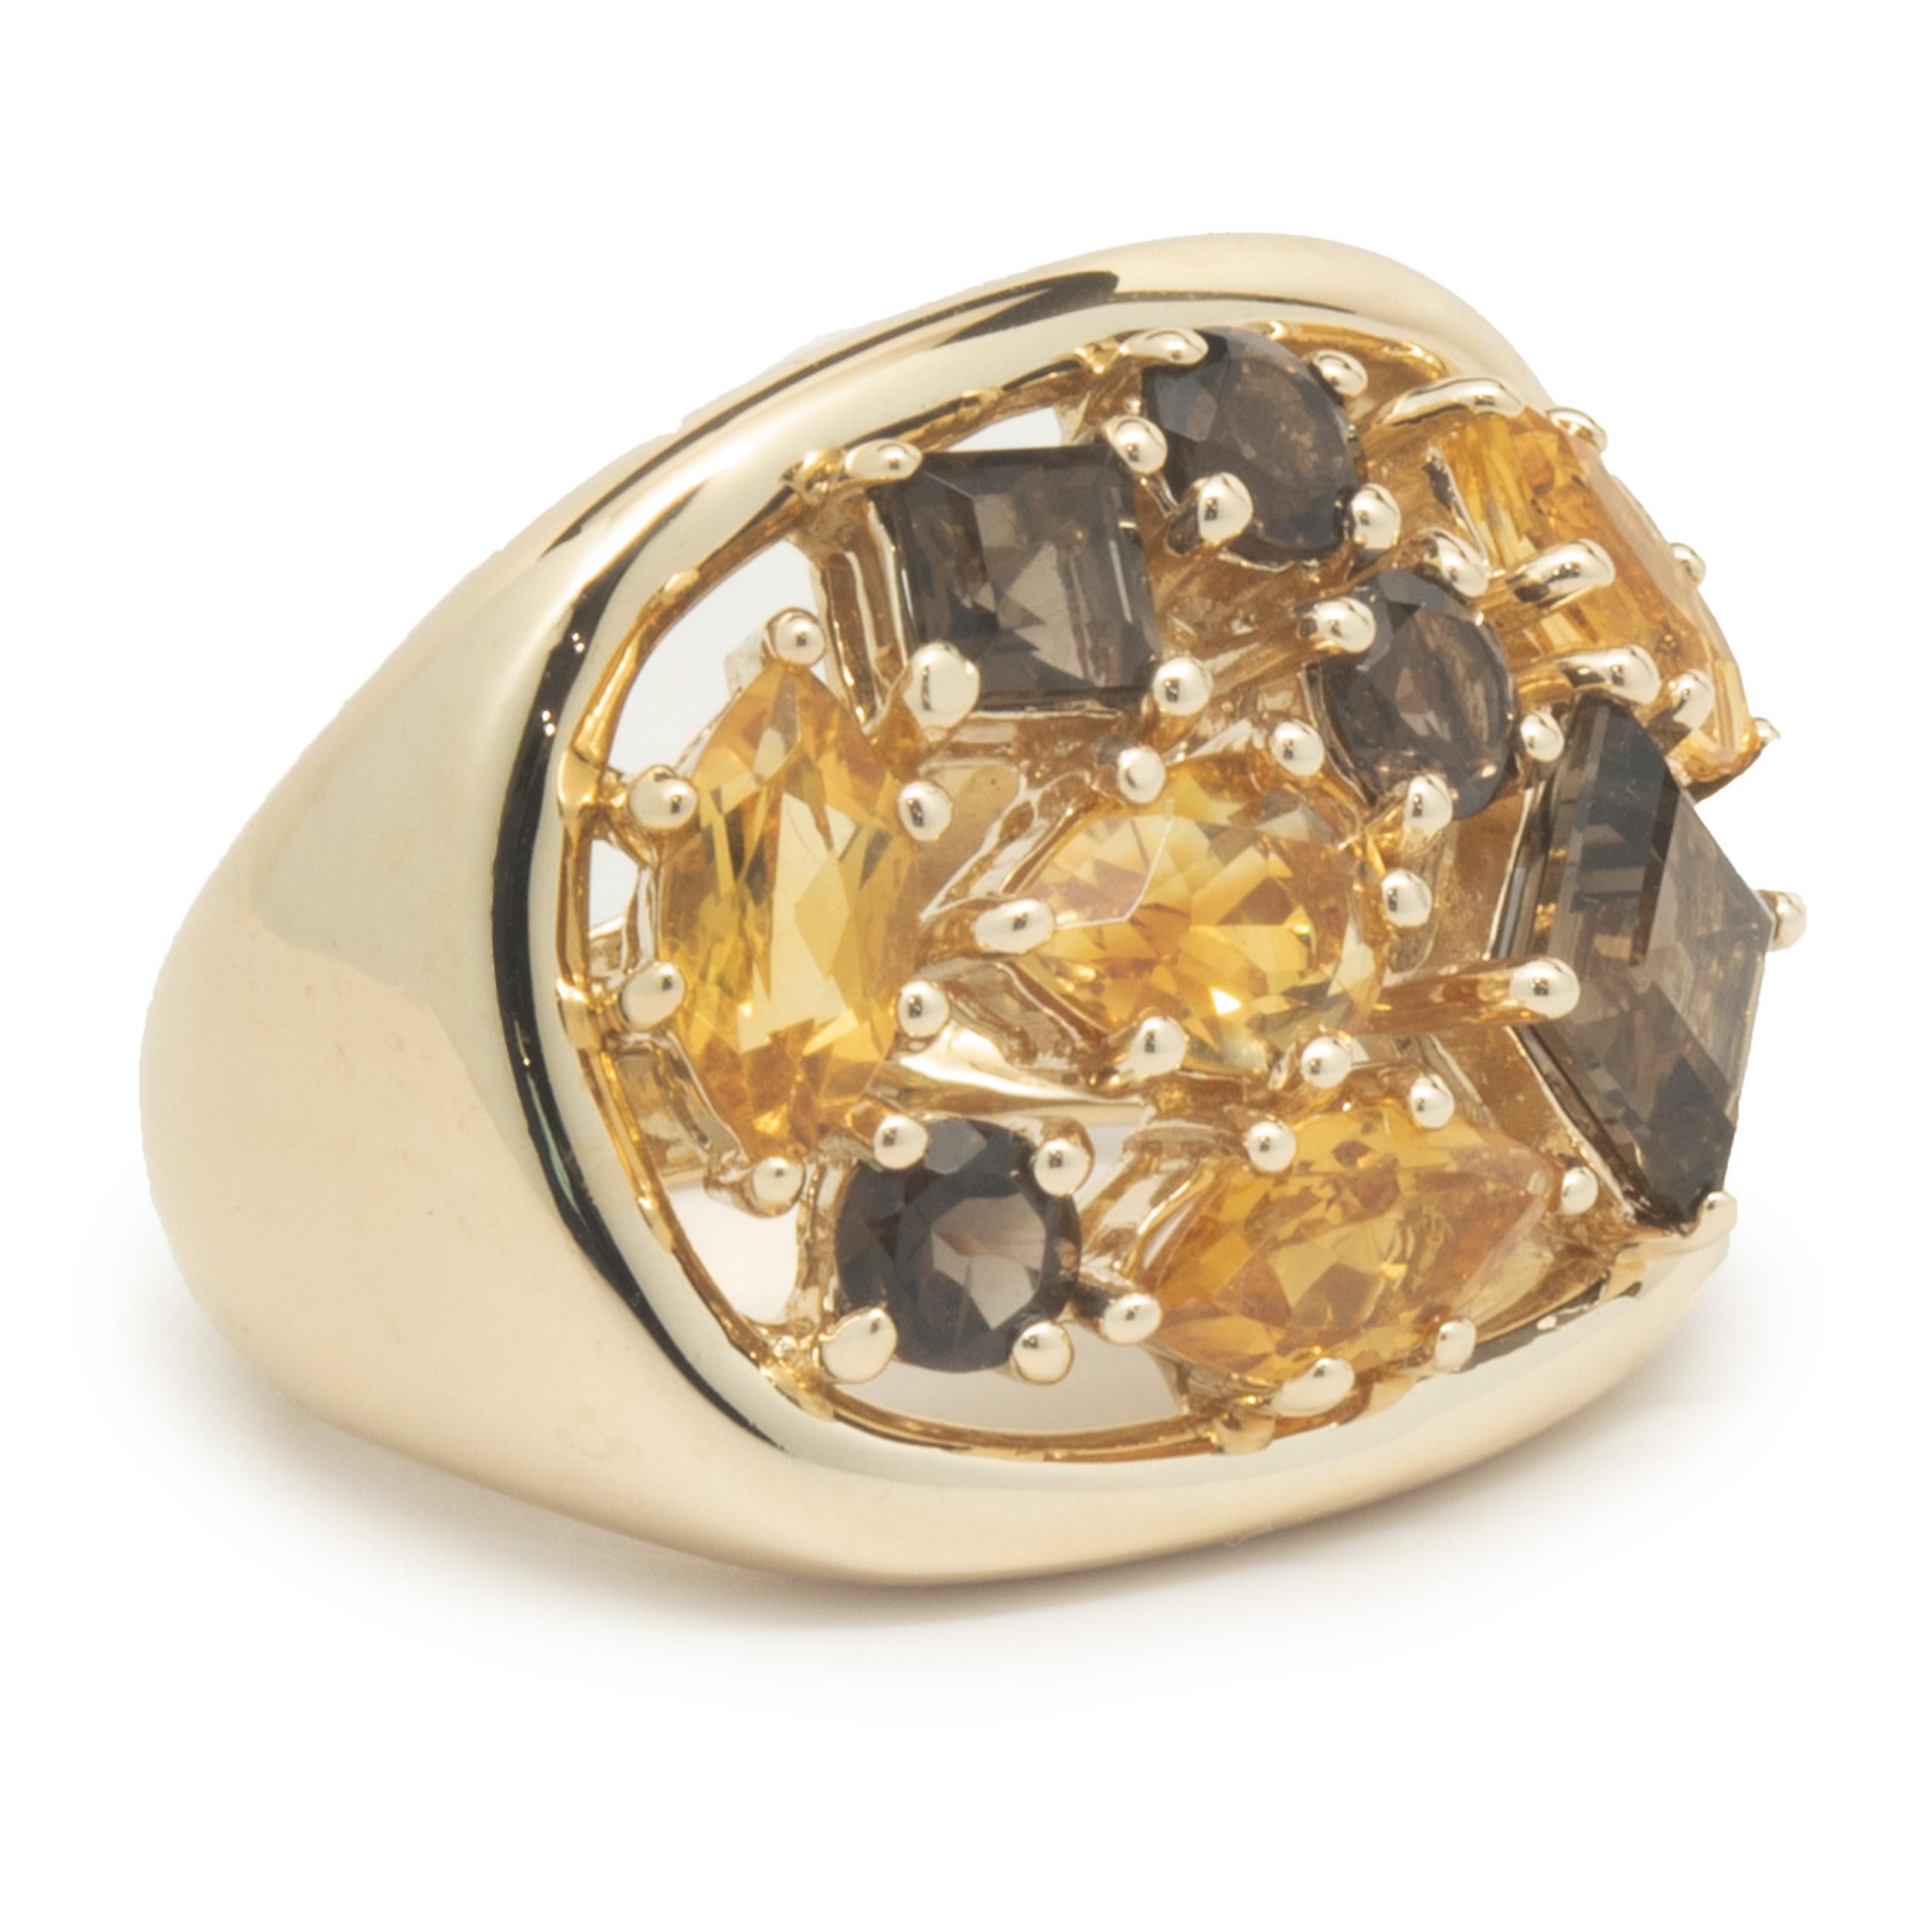 Designer: custom
Material: 14K yellow gold
Dimensions: ring top measures 19.75mm wide
Ring Size: 7 (complimentary sizing available)
Weight: 12.38 grams